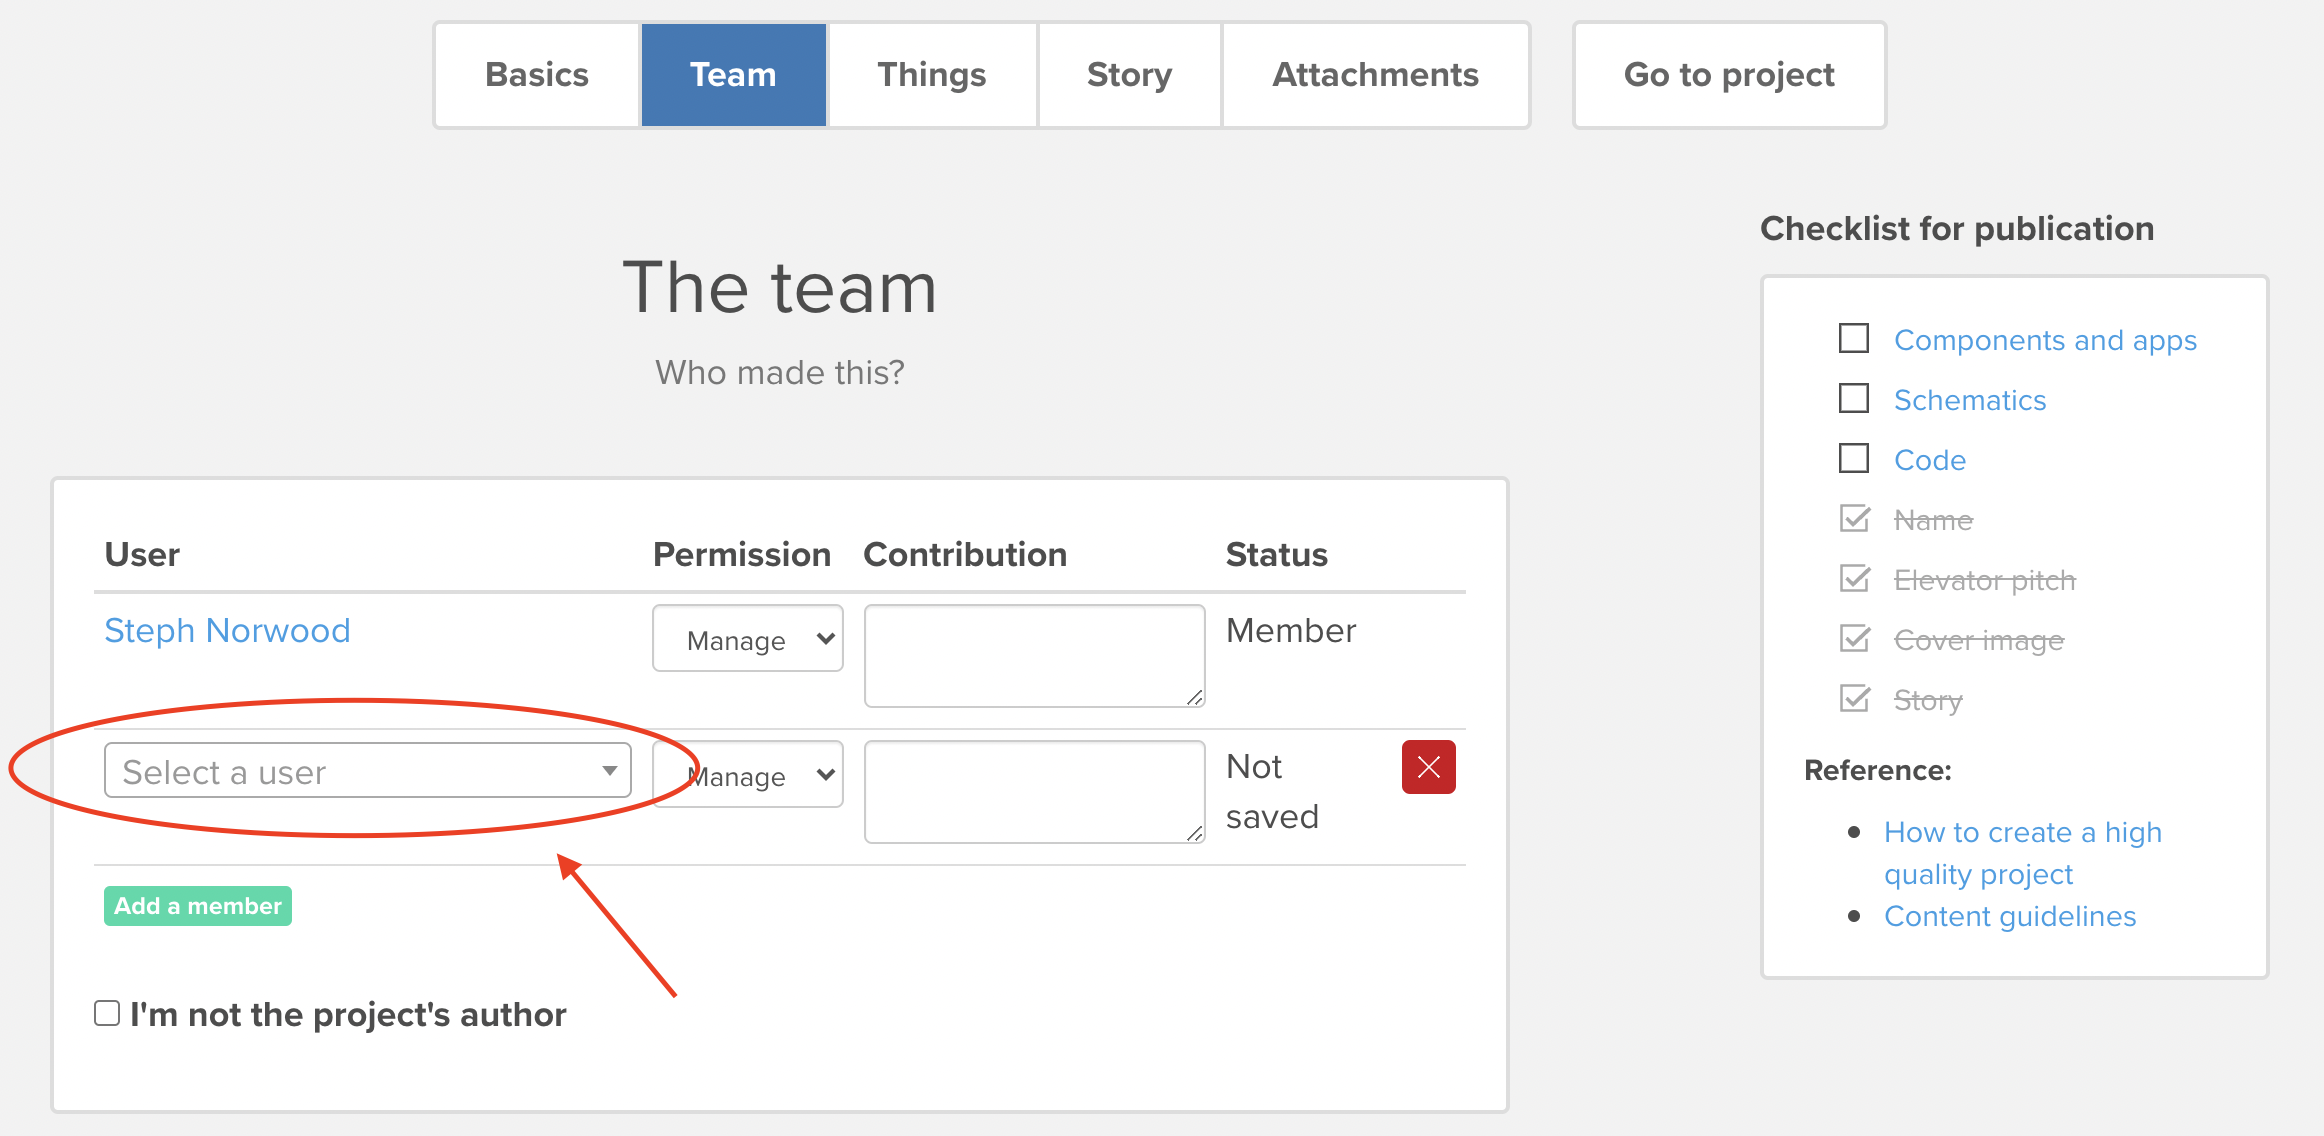 Go to the 'Team' tab and add your team members